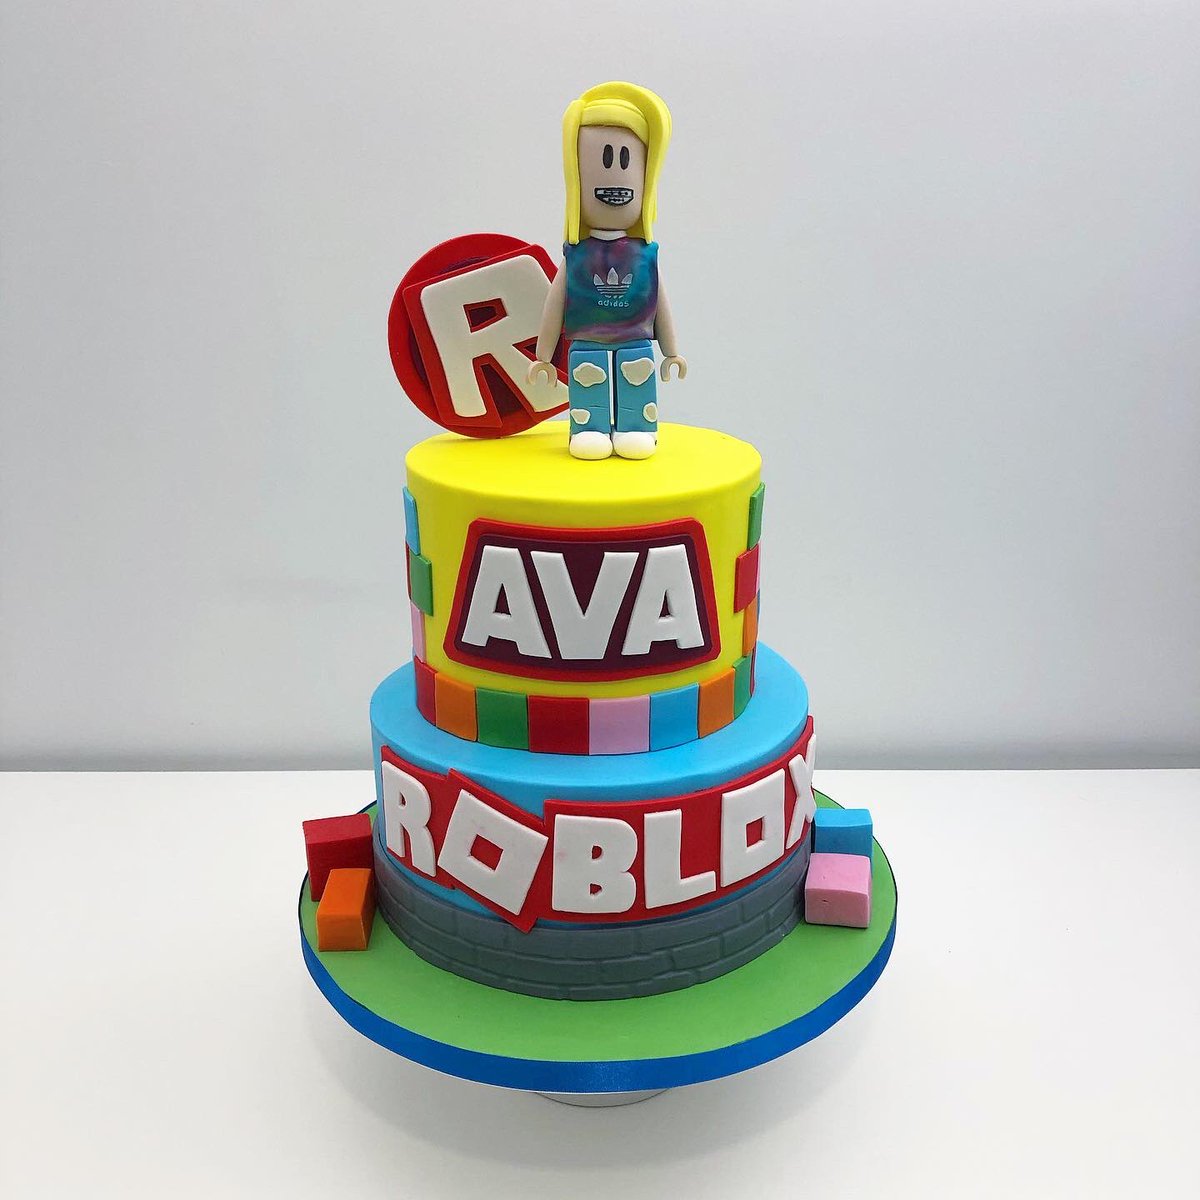 Tidbits Treats On Twitter Ava S Roblox Cake Complete With Her Own Avatar For Her 9th Birthday Cake Bespokecakes Birthdaycakes Cakes Birthday Sthelens Liverpool Cheshire Warrington Roblox Robloxcake Robloxparty Avatar Https